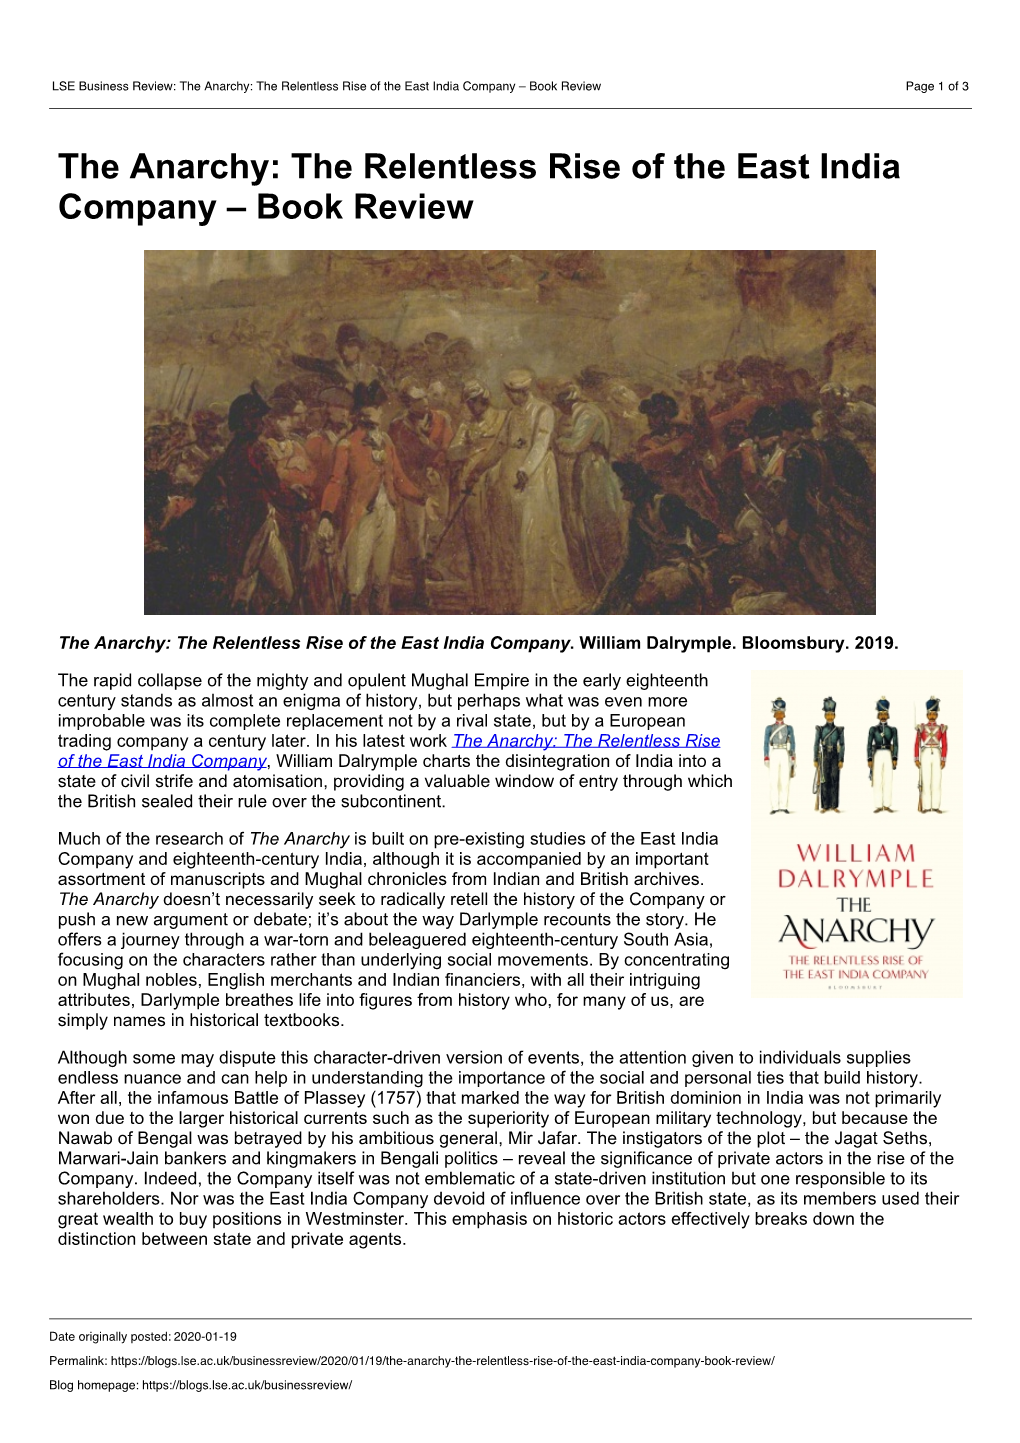 The Anarchy: the Relentless Rise of the East India Company – Book Review Page 1 of 3